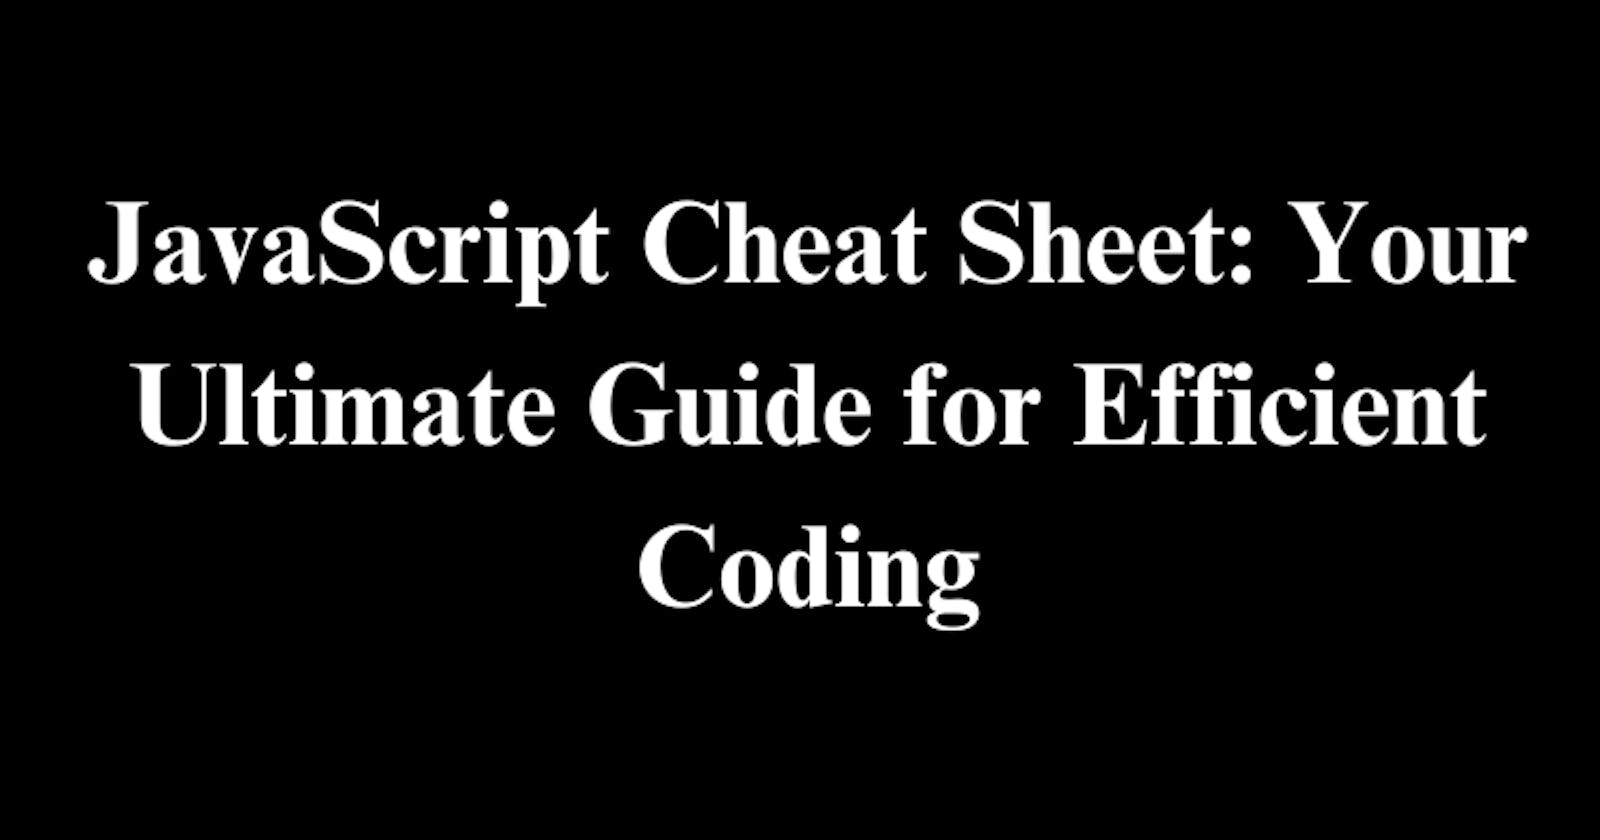 JavaScript Cheat Sheet: Your Ultimate Guide for Efficient Coding